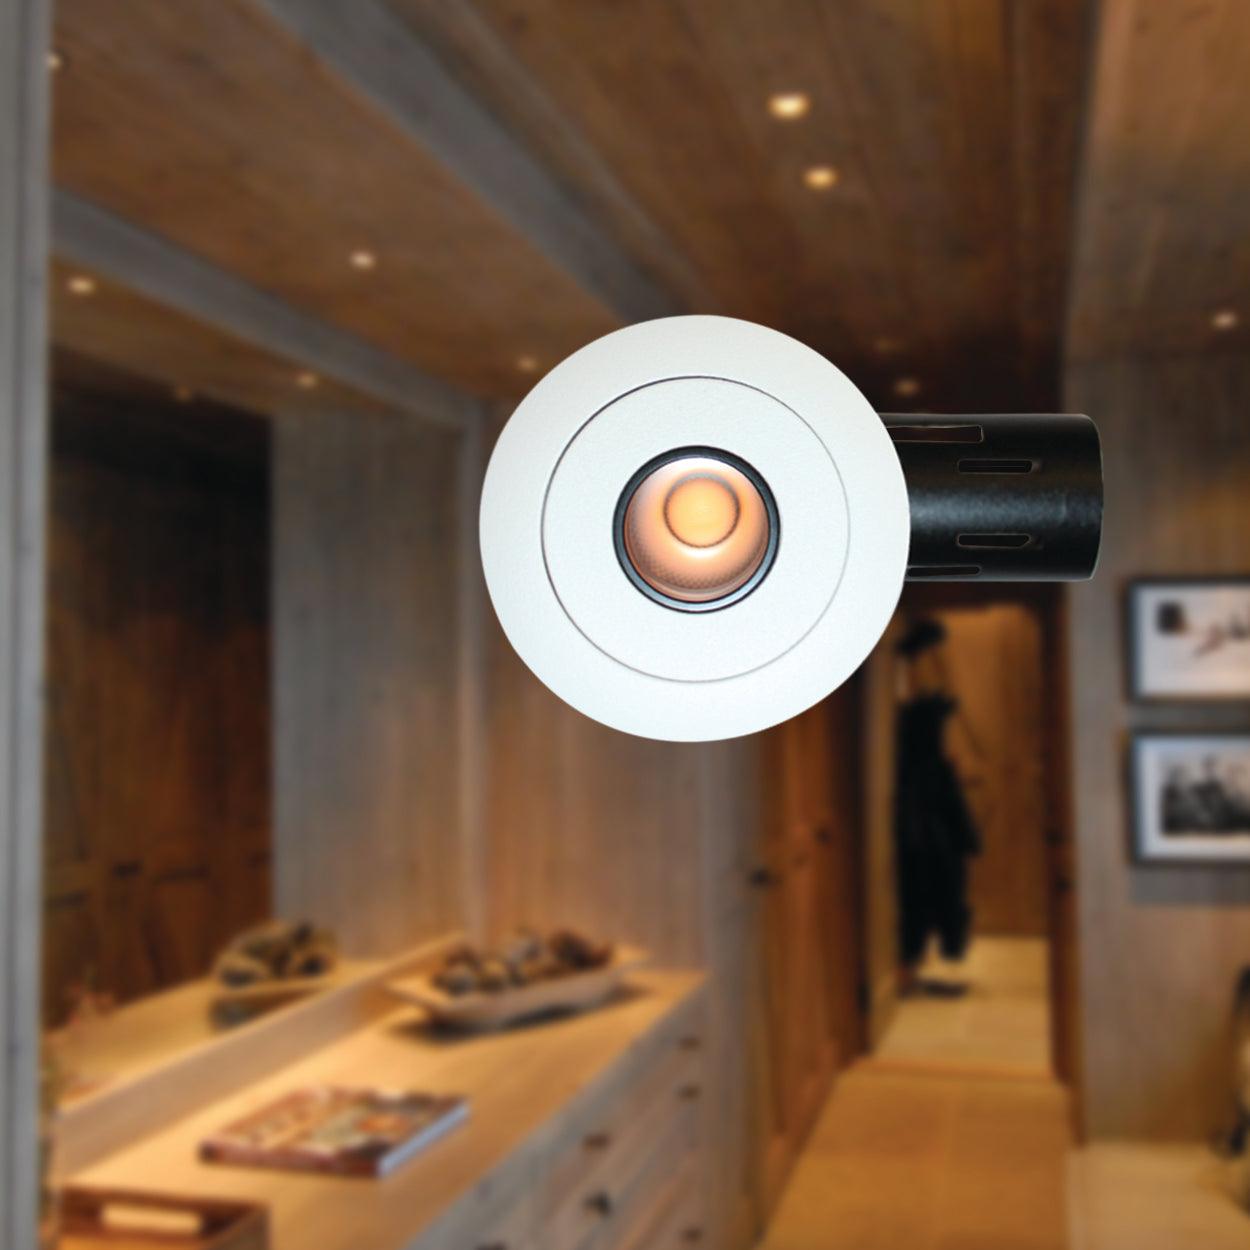 ANKUR TUNNEL LOW HEIGHT SHARP LOOKING RECESSED LED DOWNLIGHT - Ankur Lighting